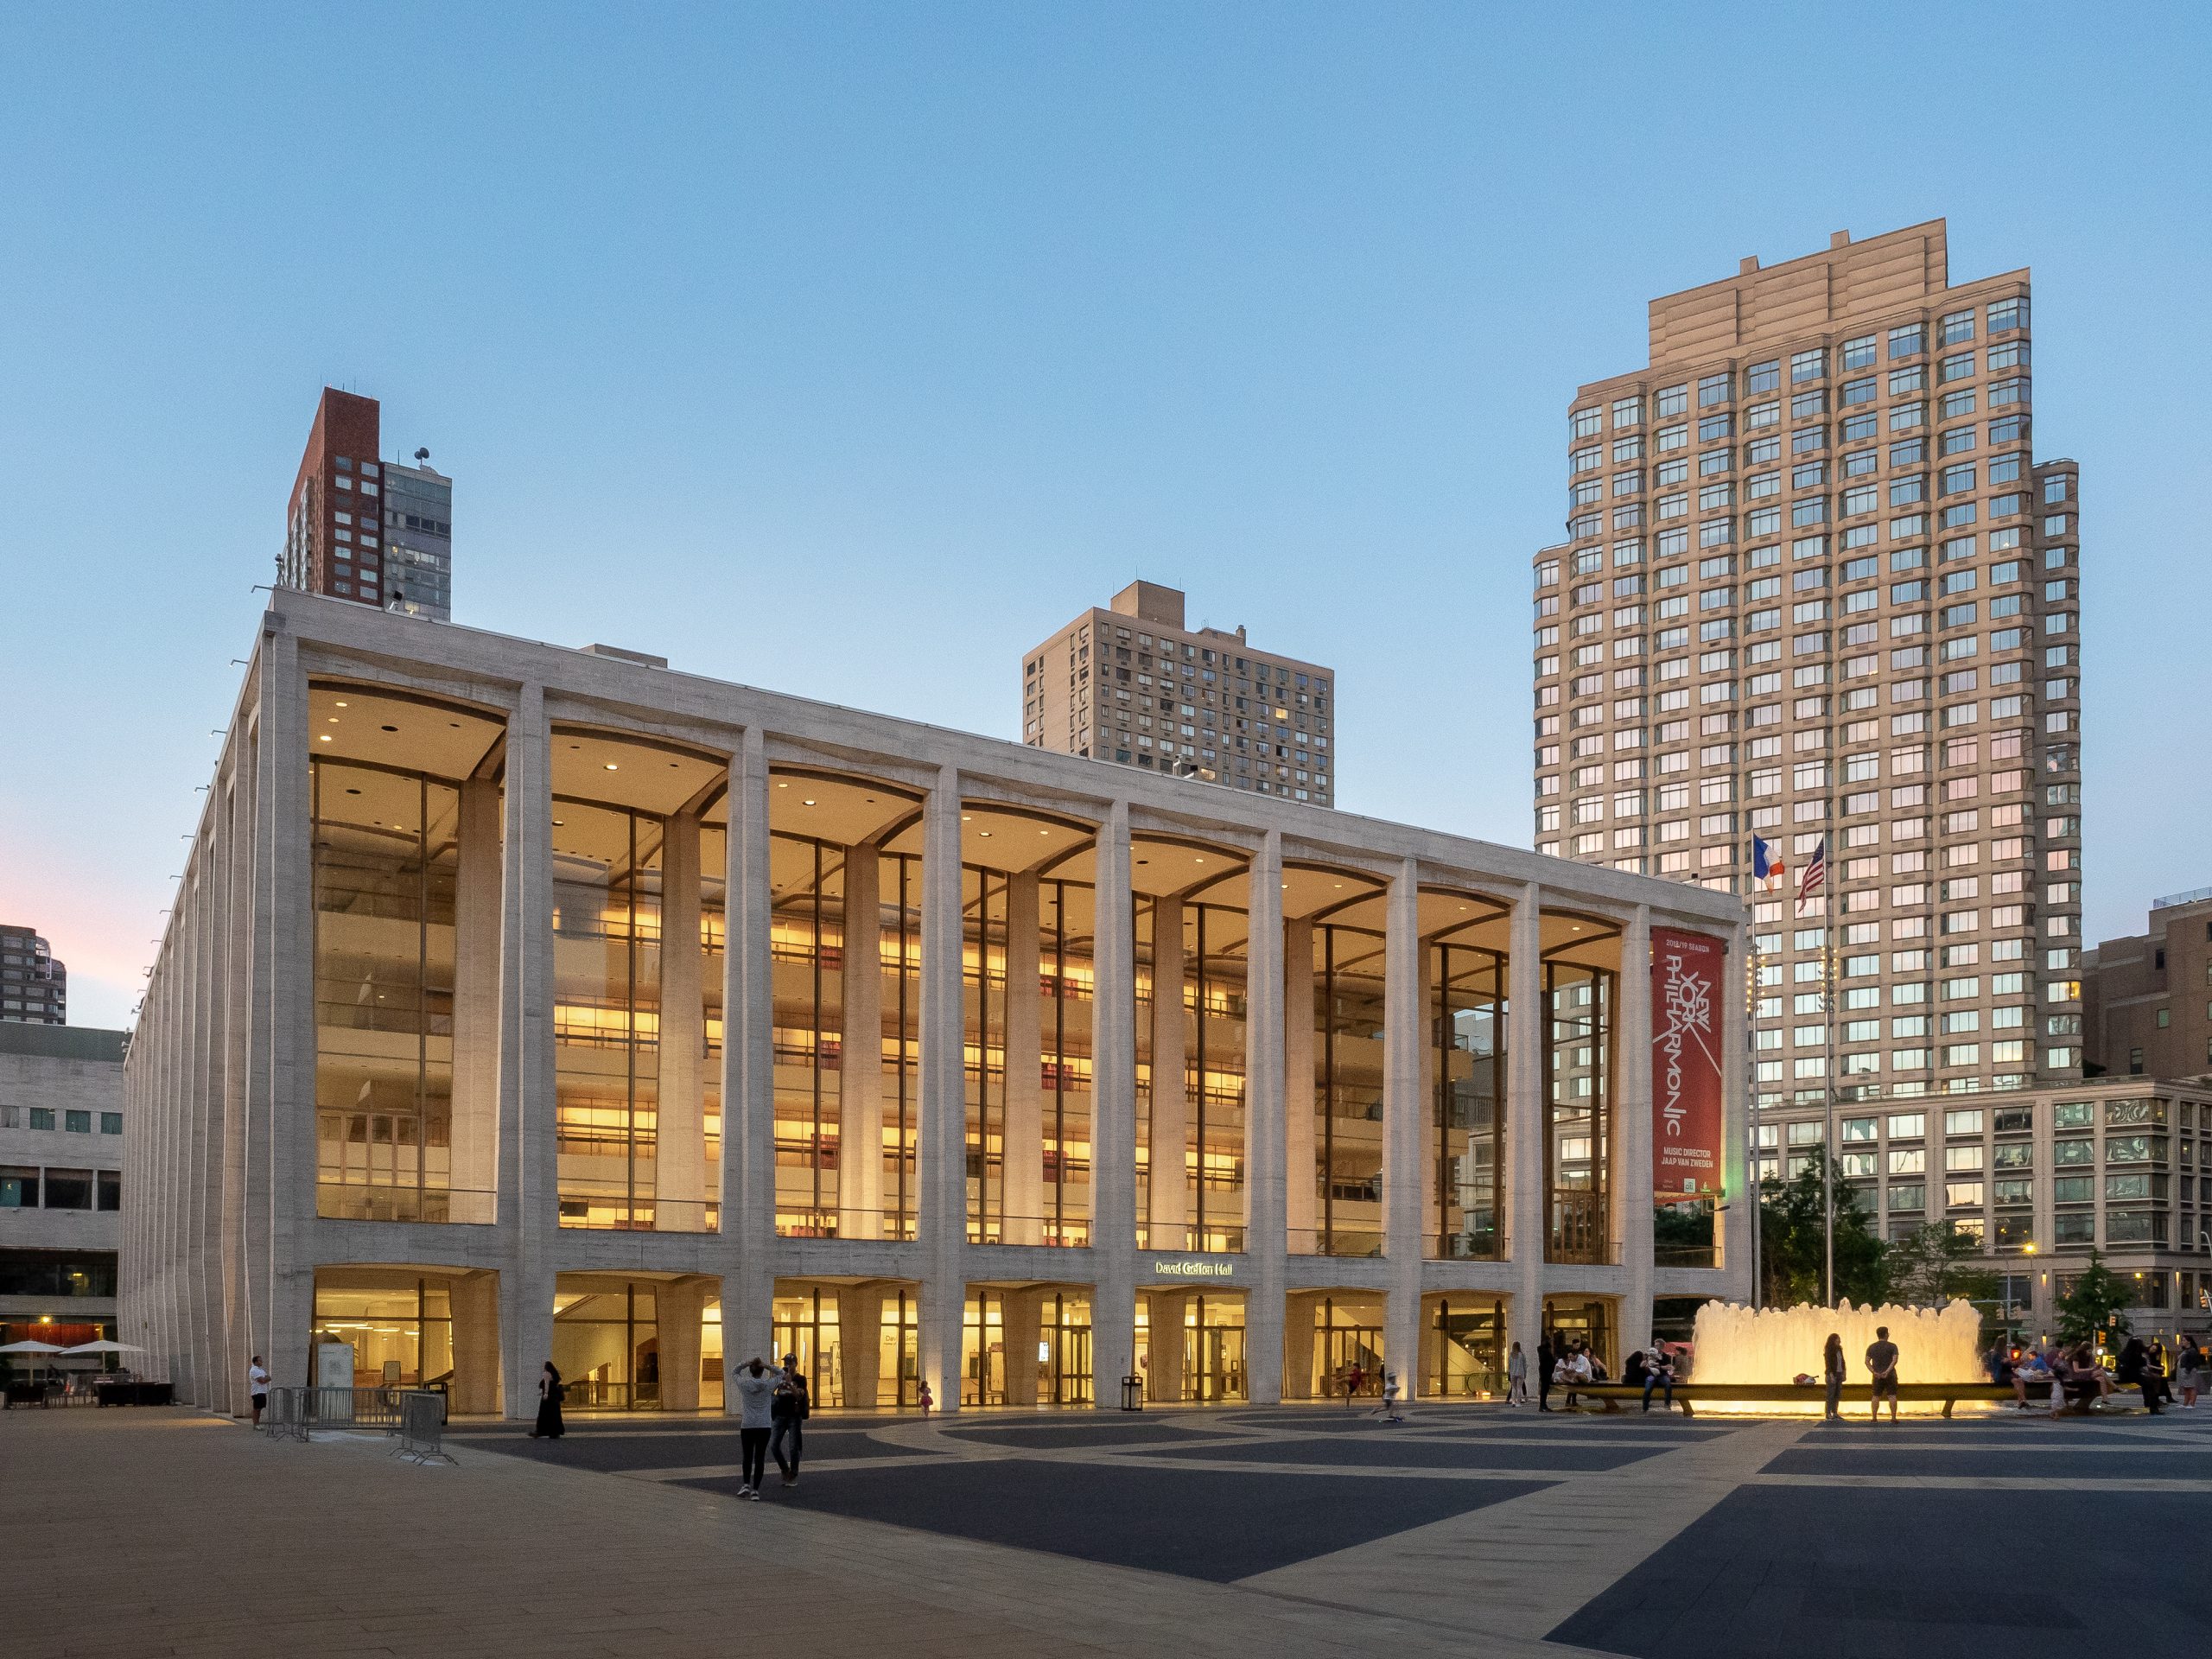 David Geffen Hall, home of the New York Philharmonic in Lincoln Center